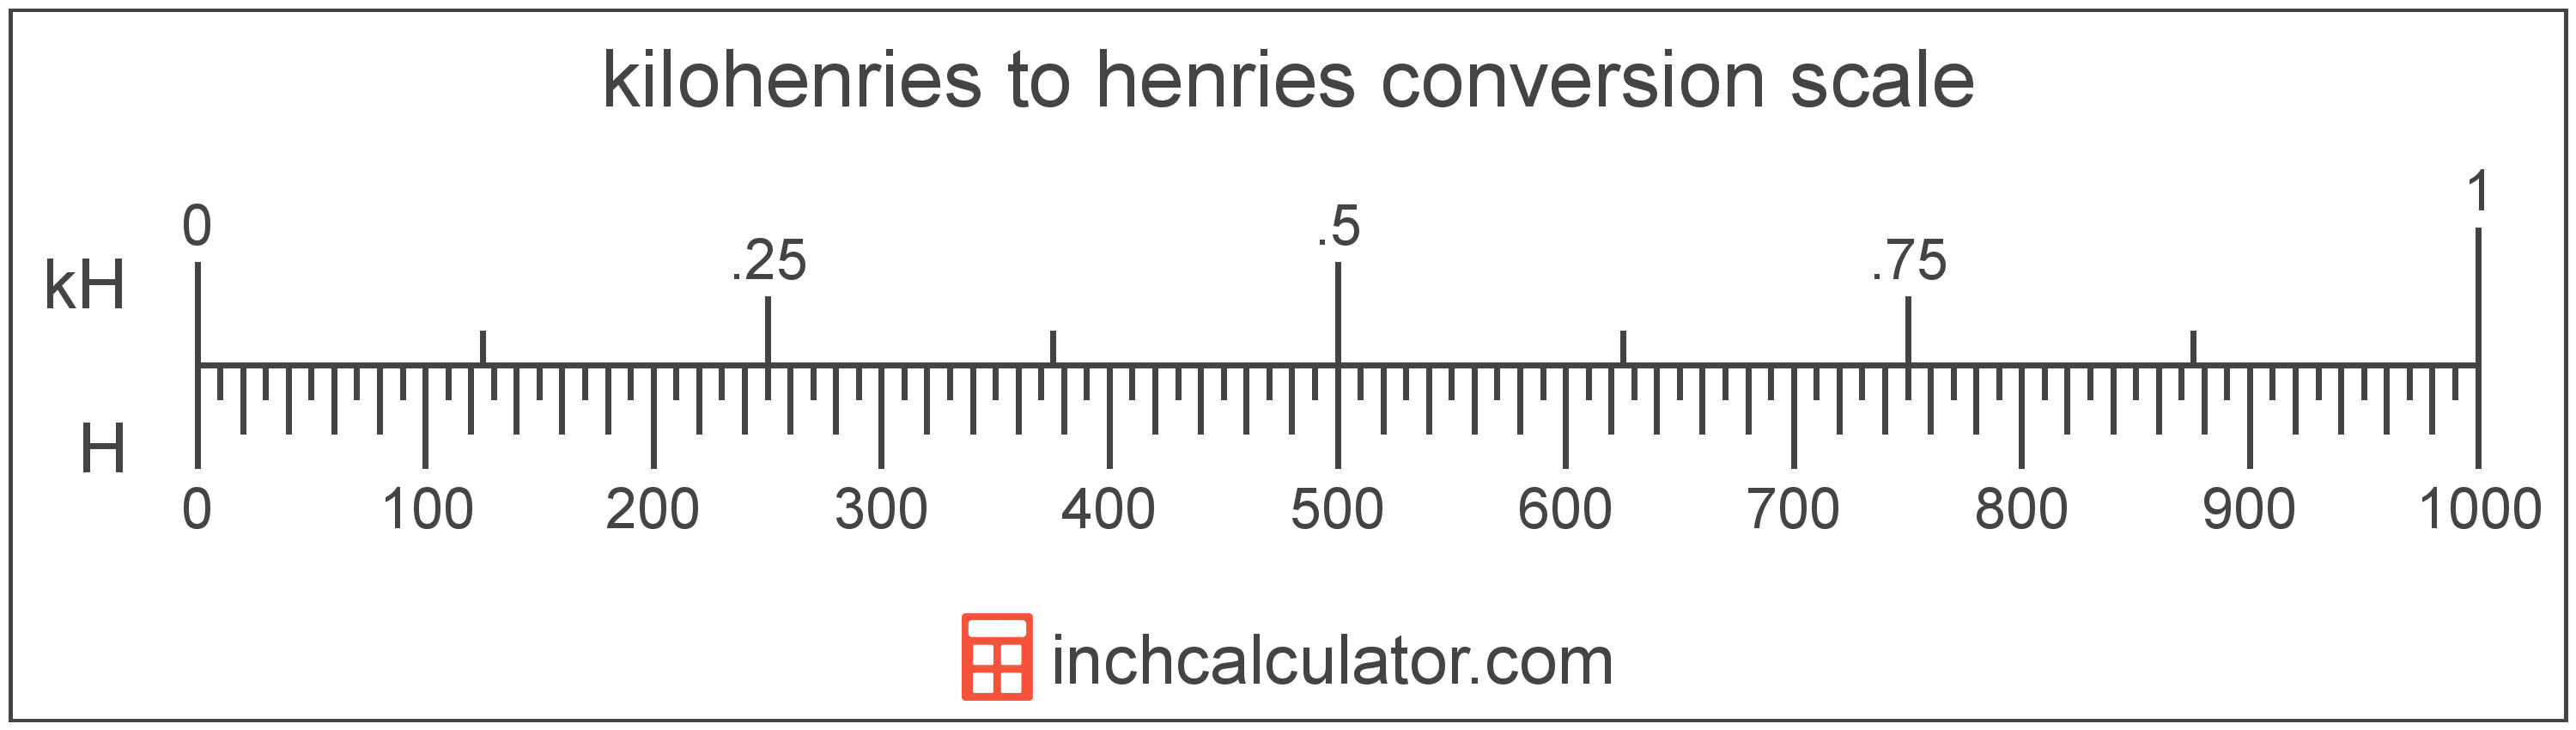 conversion scale showing henries and equivalent kilohenries electrical inductance values